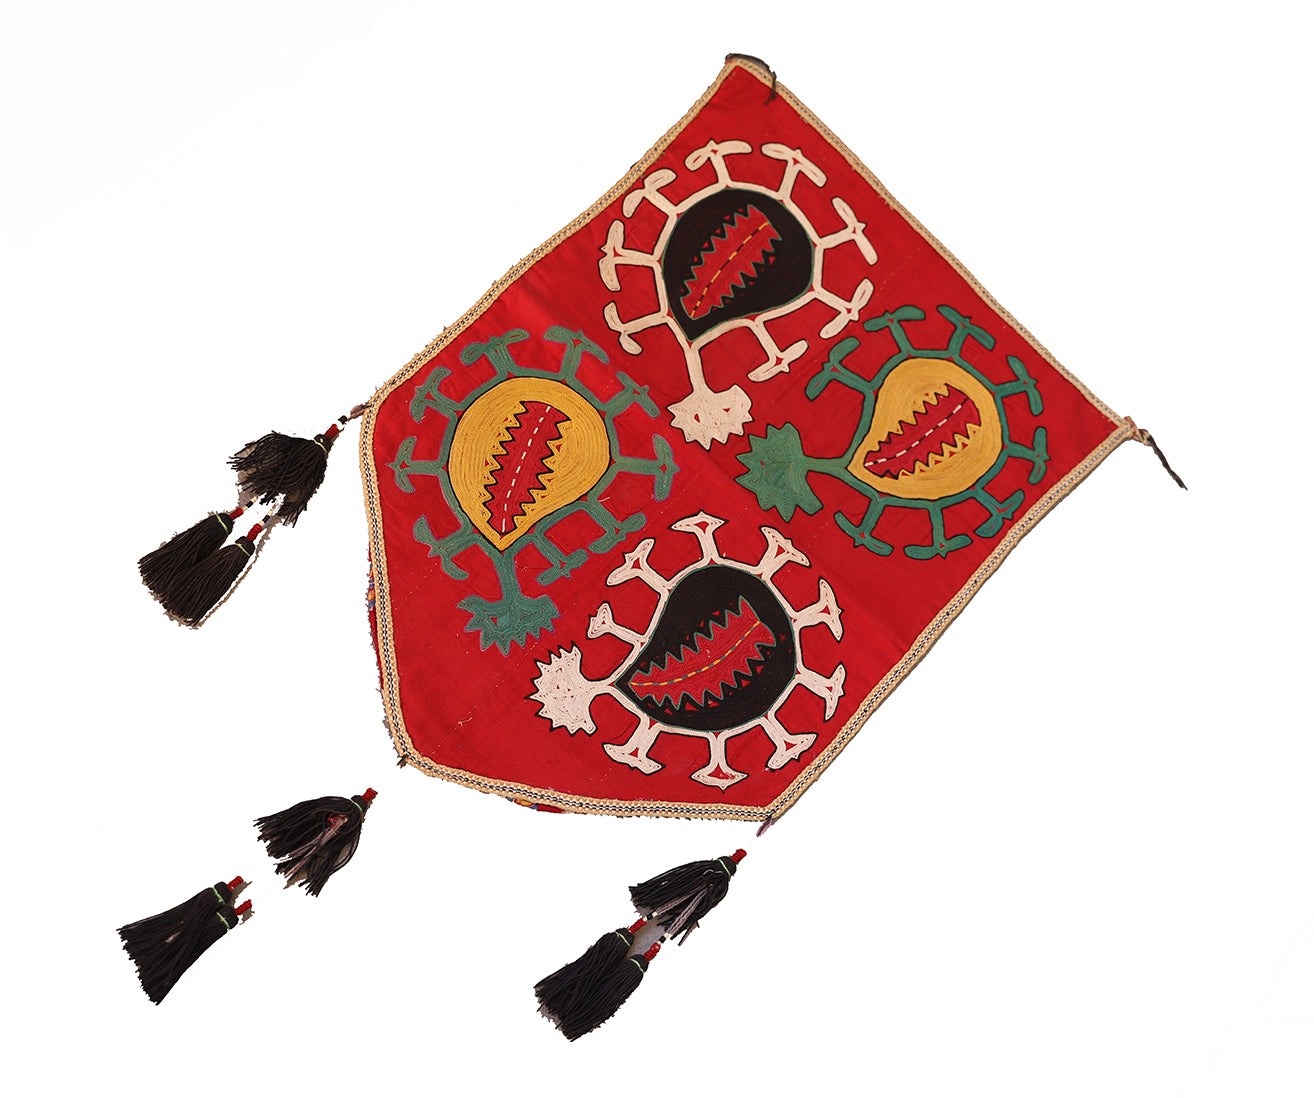 Antique Uzbek Geometric Suzani Embroidery Featuring a Paisley Motif in Pomegranate Red Wool